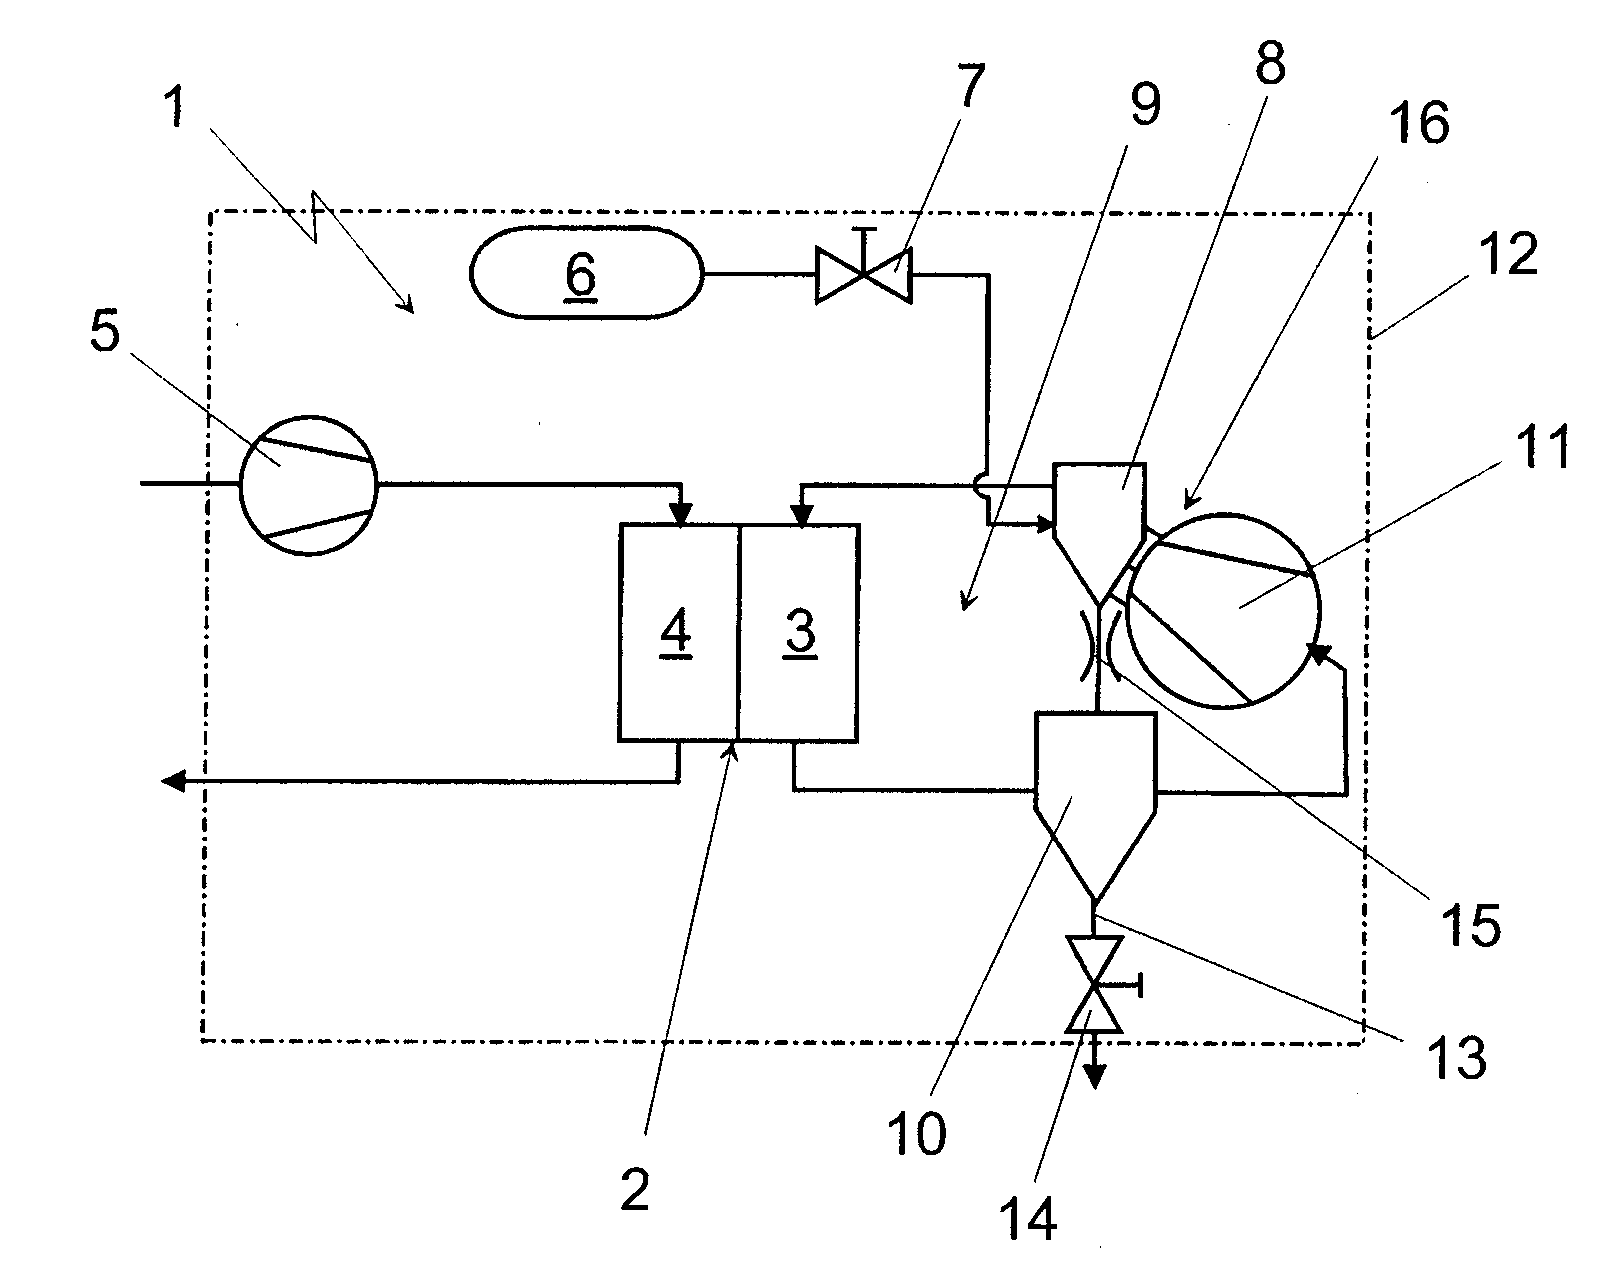 Fuel Cell System Having a Fluid Separator in the Anode Circuit